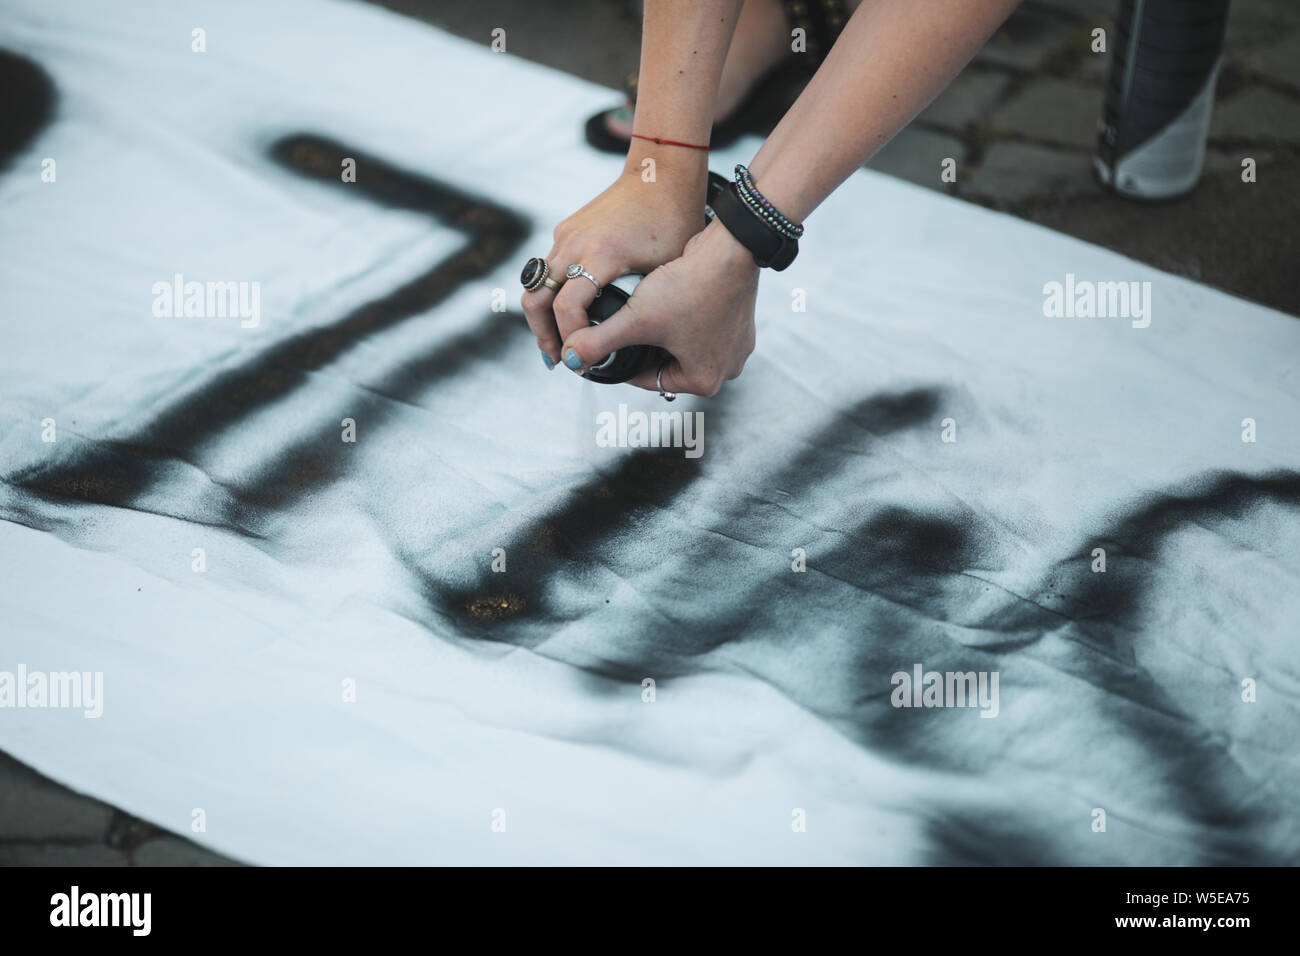 Details with the hands of a young woman writing with a black paint spray a feminist message on a piece of whitee cloth Stock Photo